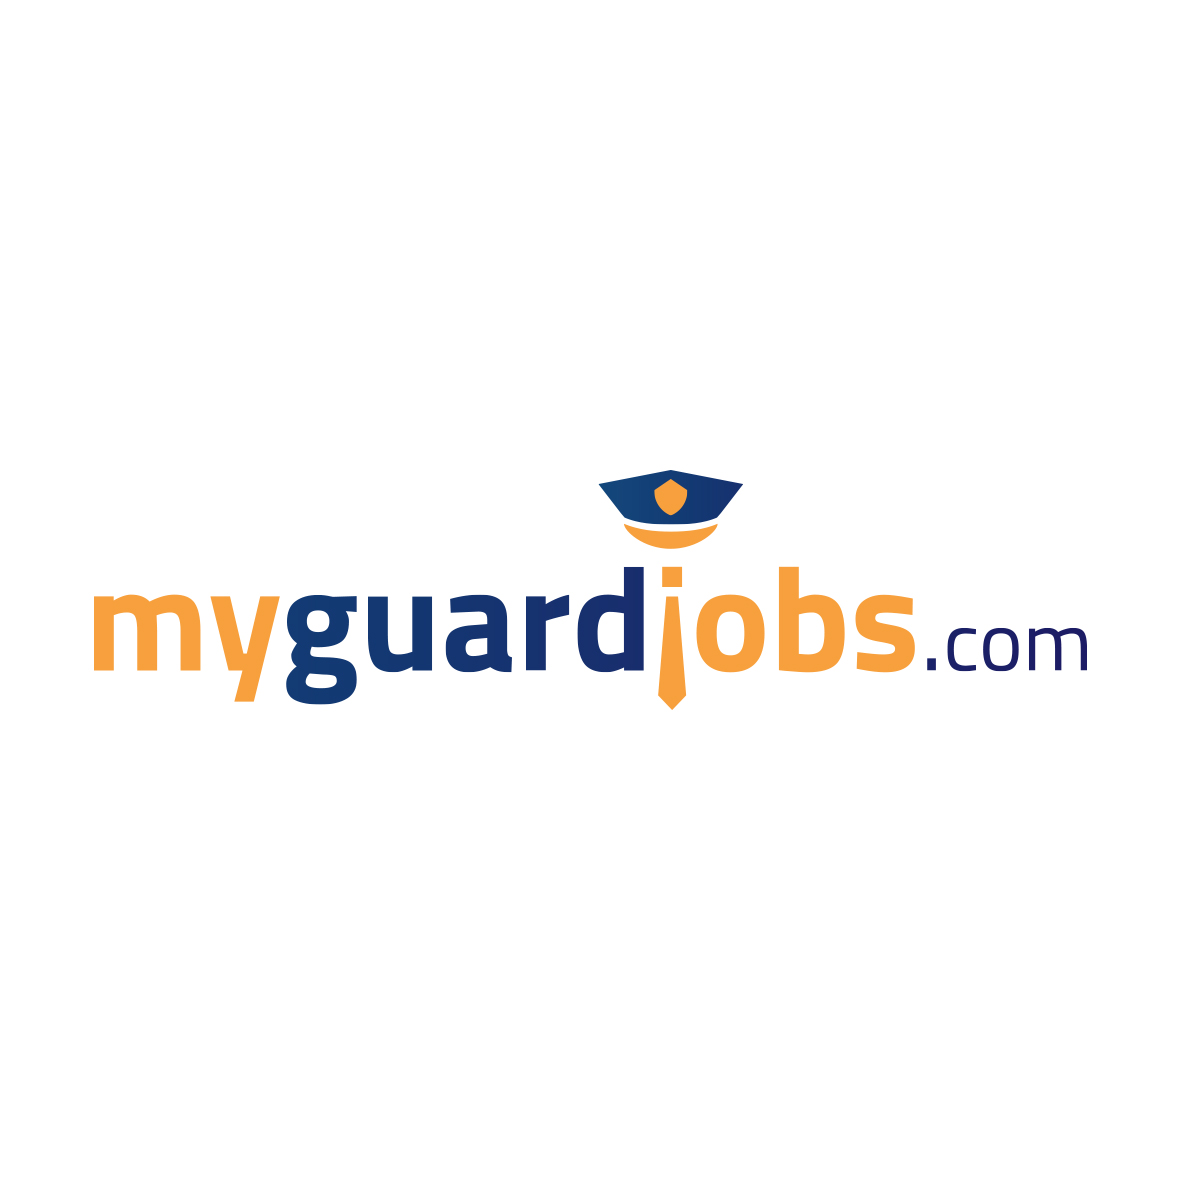 Kwantek Launches a Job Board Exclusively for Private Security Contractors